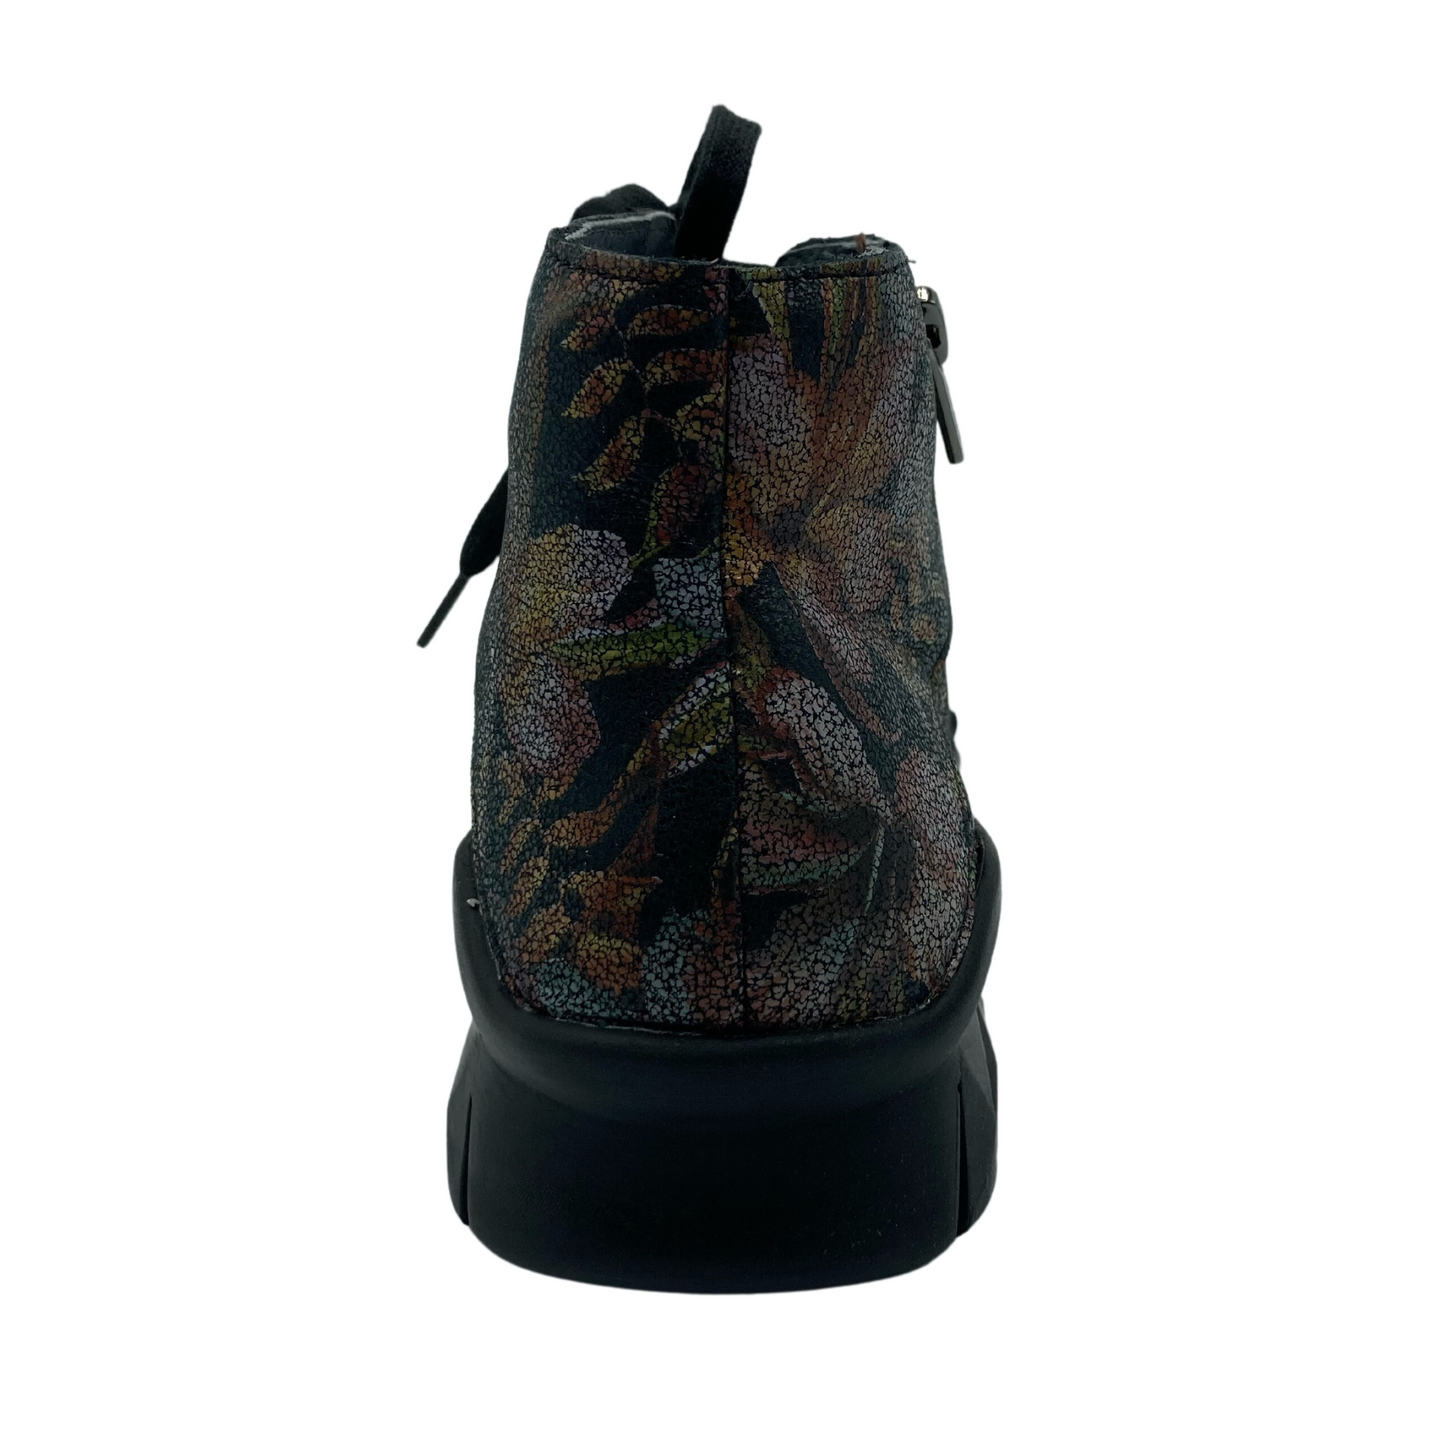 Back view of black floral leather sneaker with black sole and laces